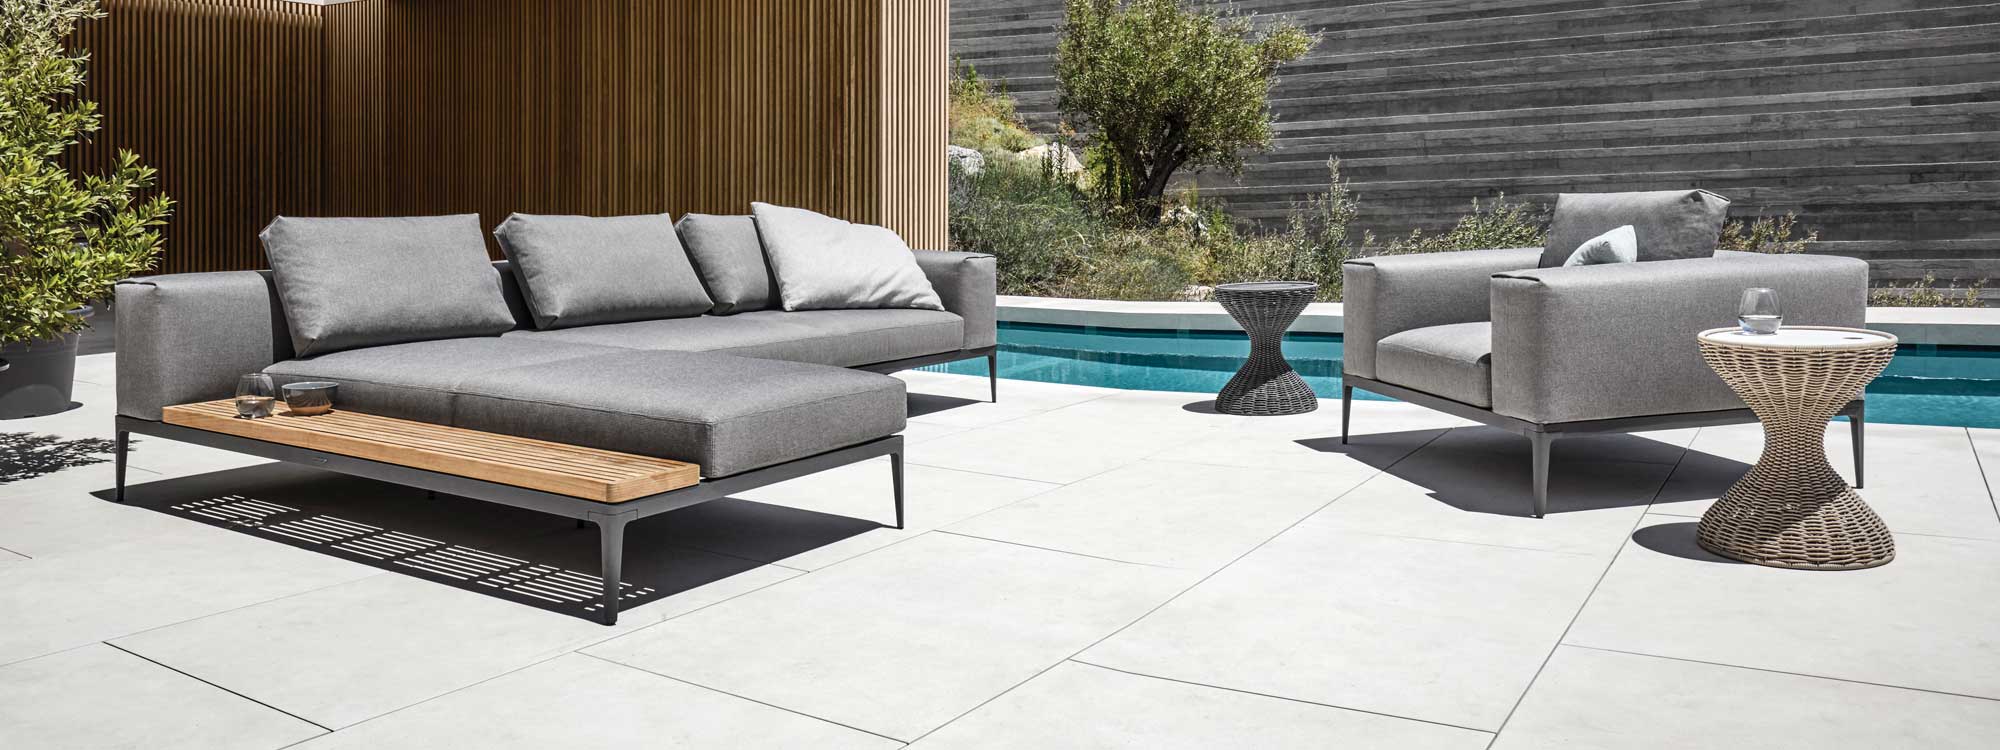 Image of Grid minimalist garden sofa and lounge chair in Meteor grey with grey cushions by Gloster, in sunny courtyard next to swimming pool